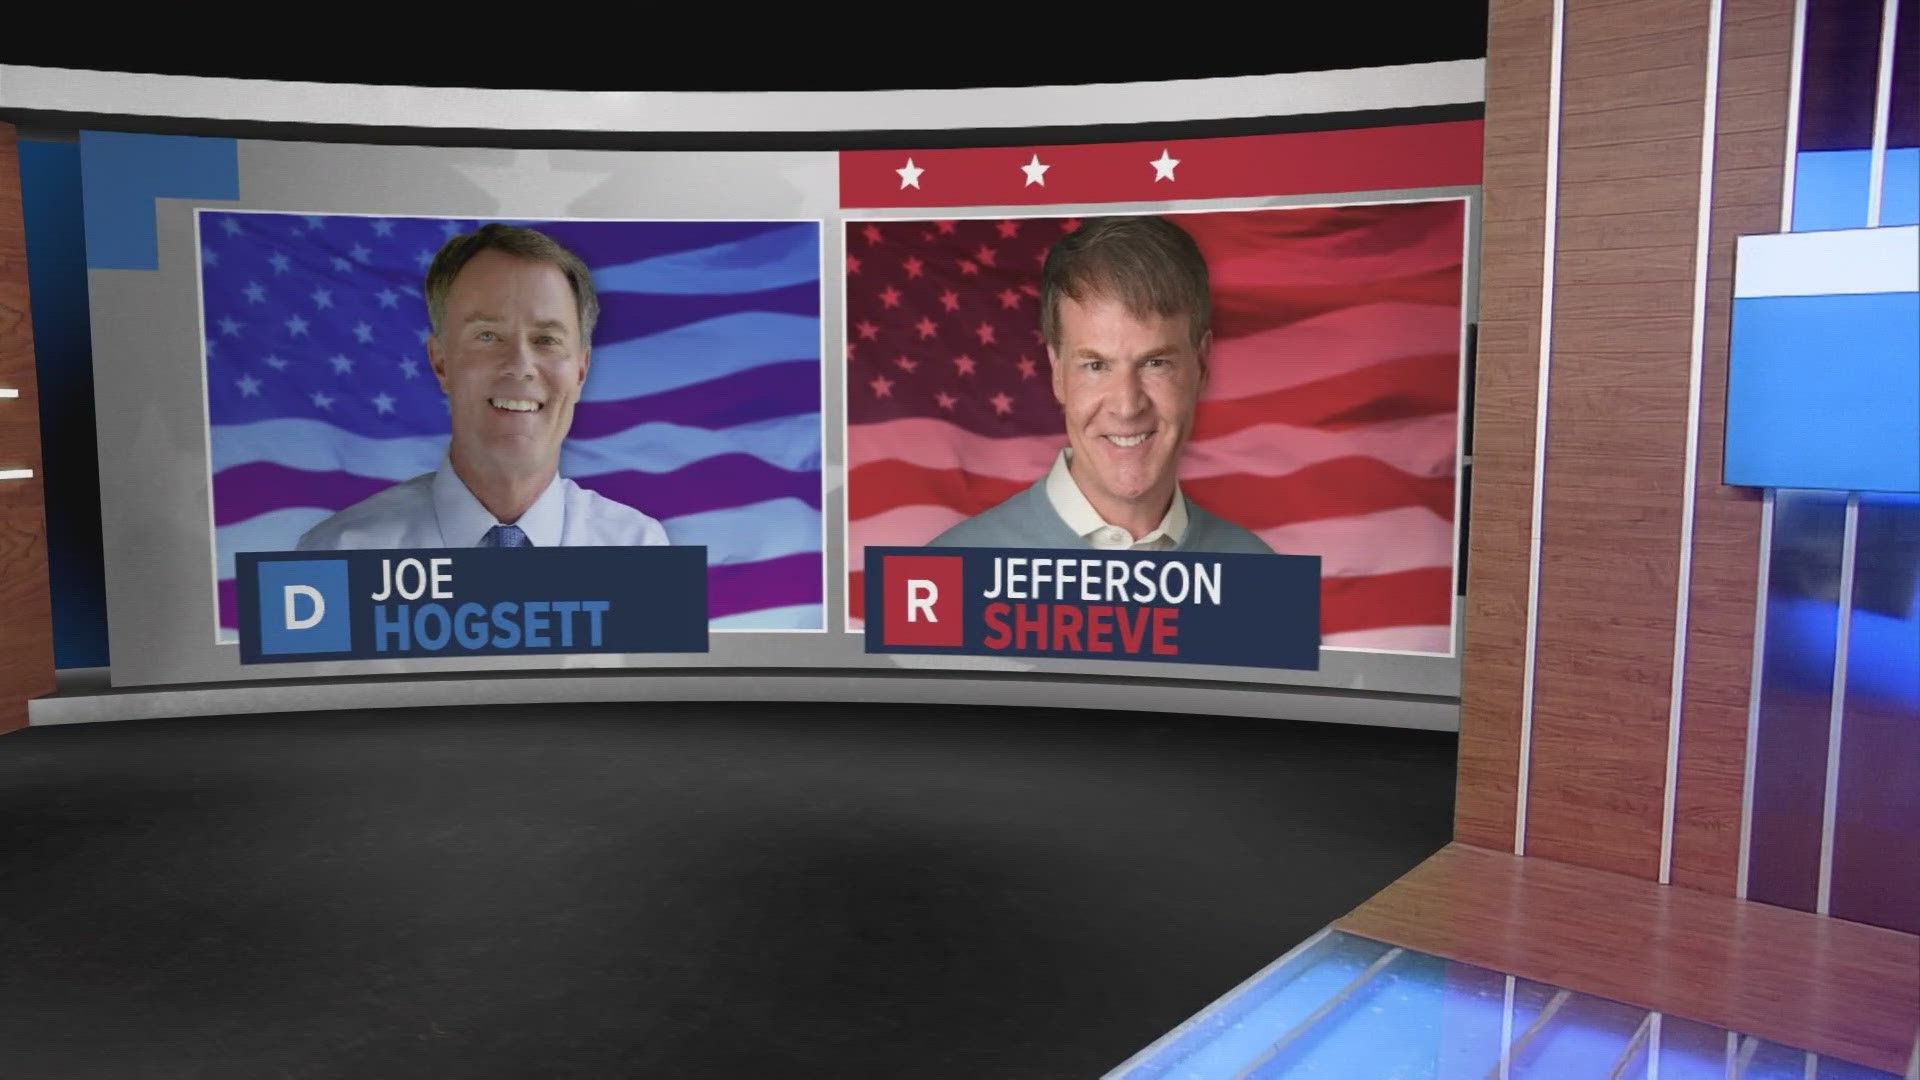 13News reporters Emily Longnecker and Lauren Kostiuk will have live coverage of the Indianapolis mayoral election between Joe Hogsett and Jefferson Shreve.